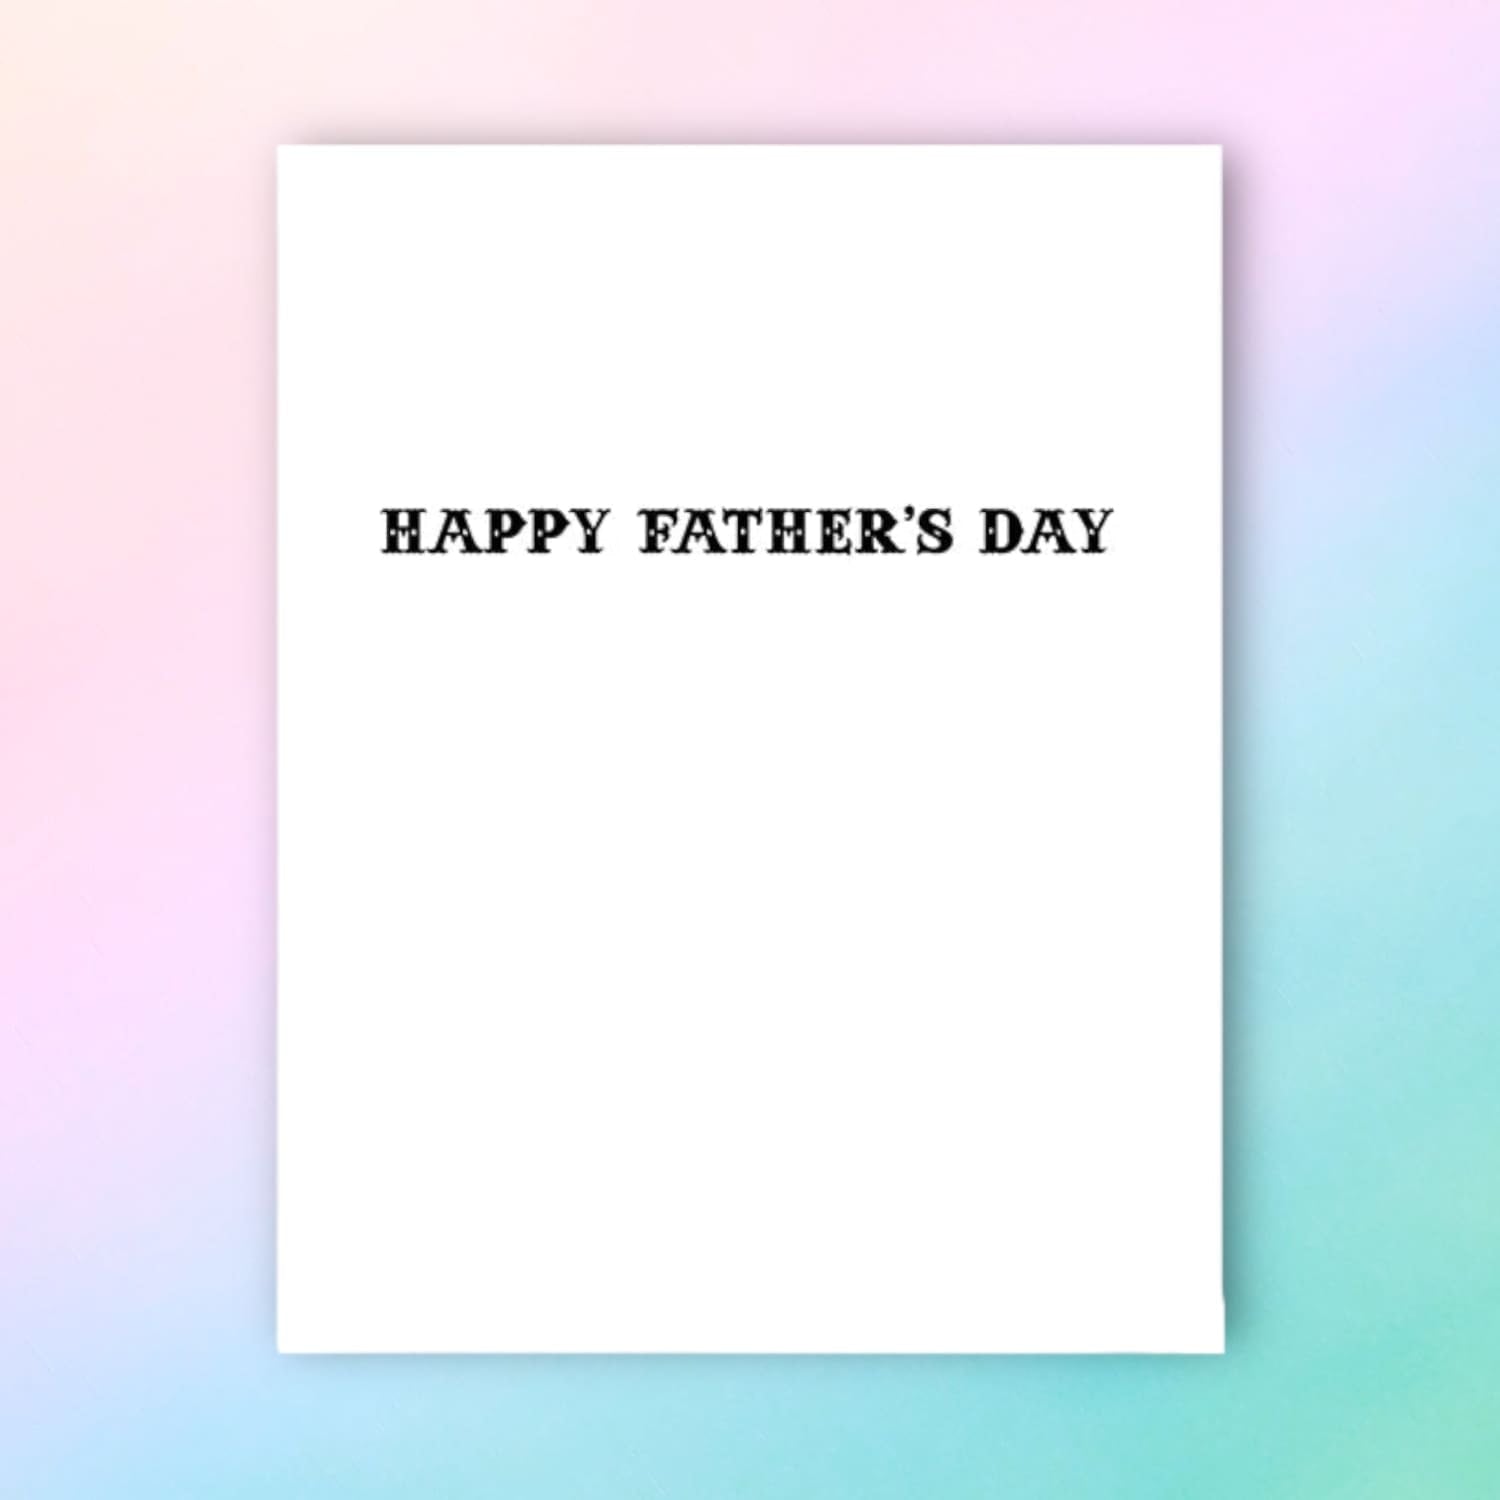 Willie Nelson Father’s Day Card 0223 - Fathers Day - Card -